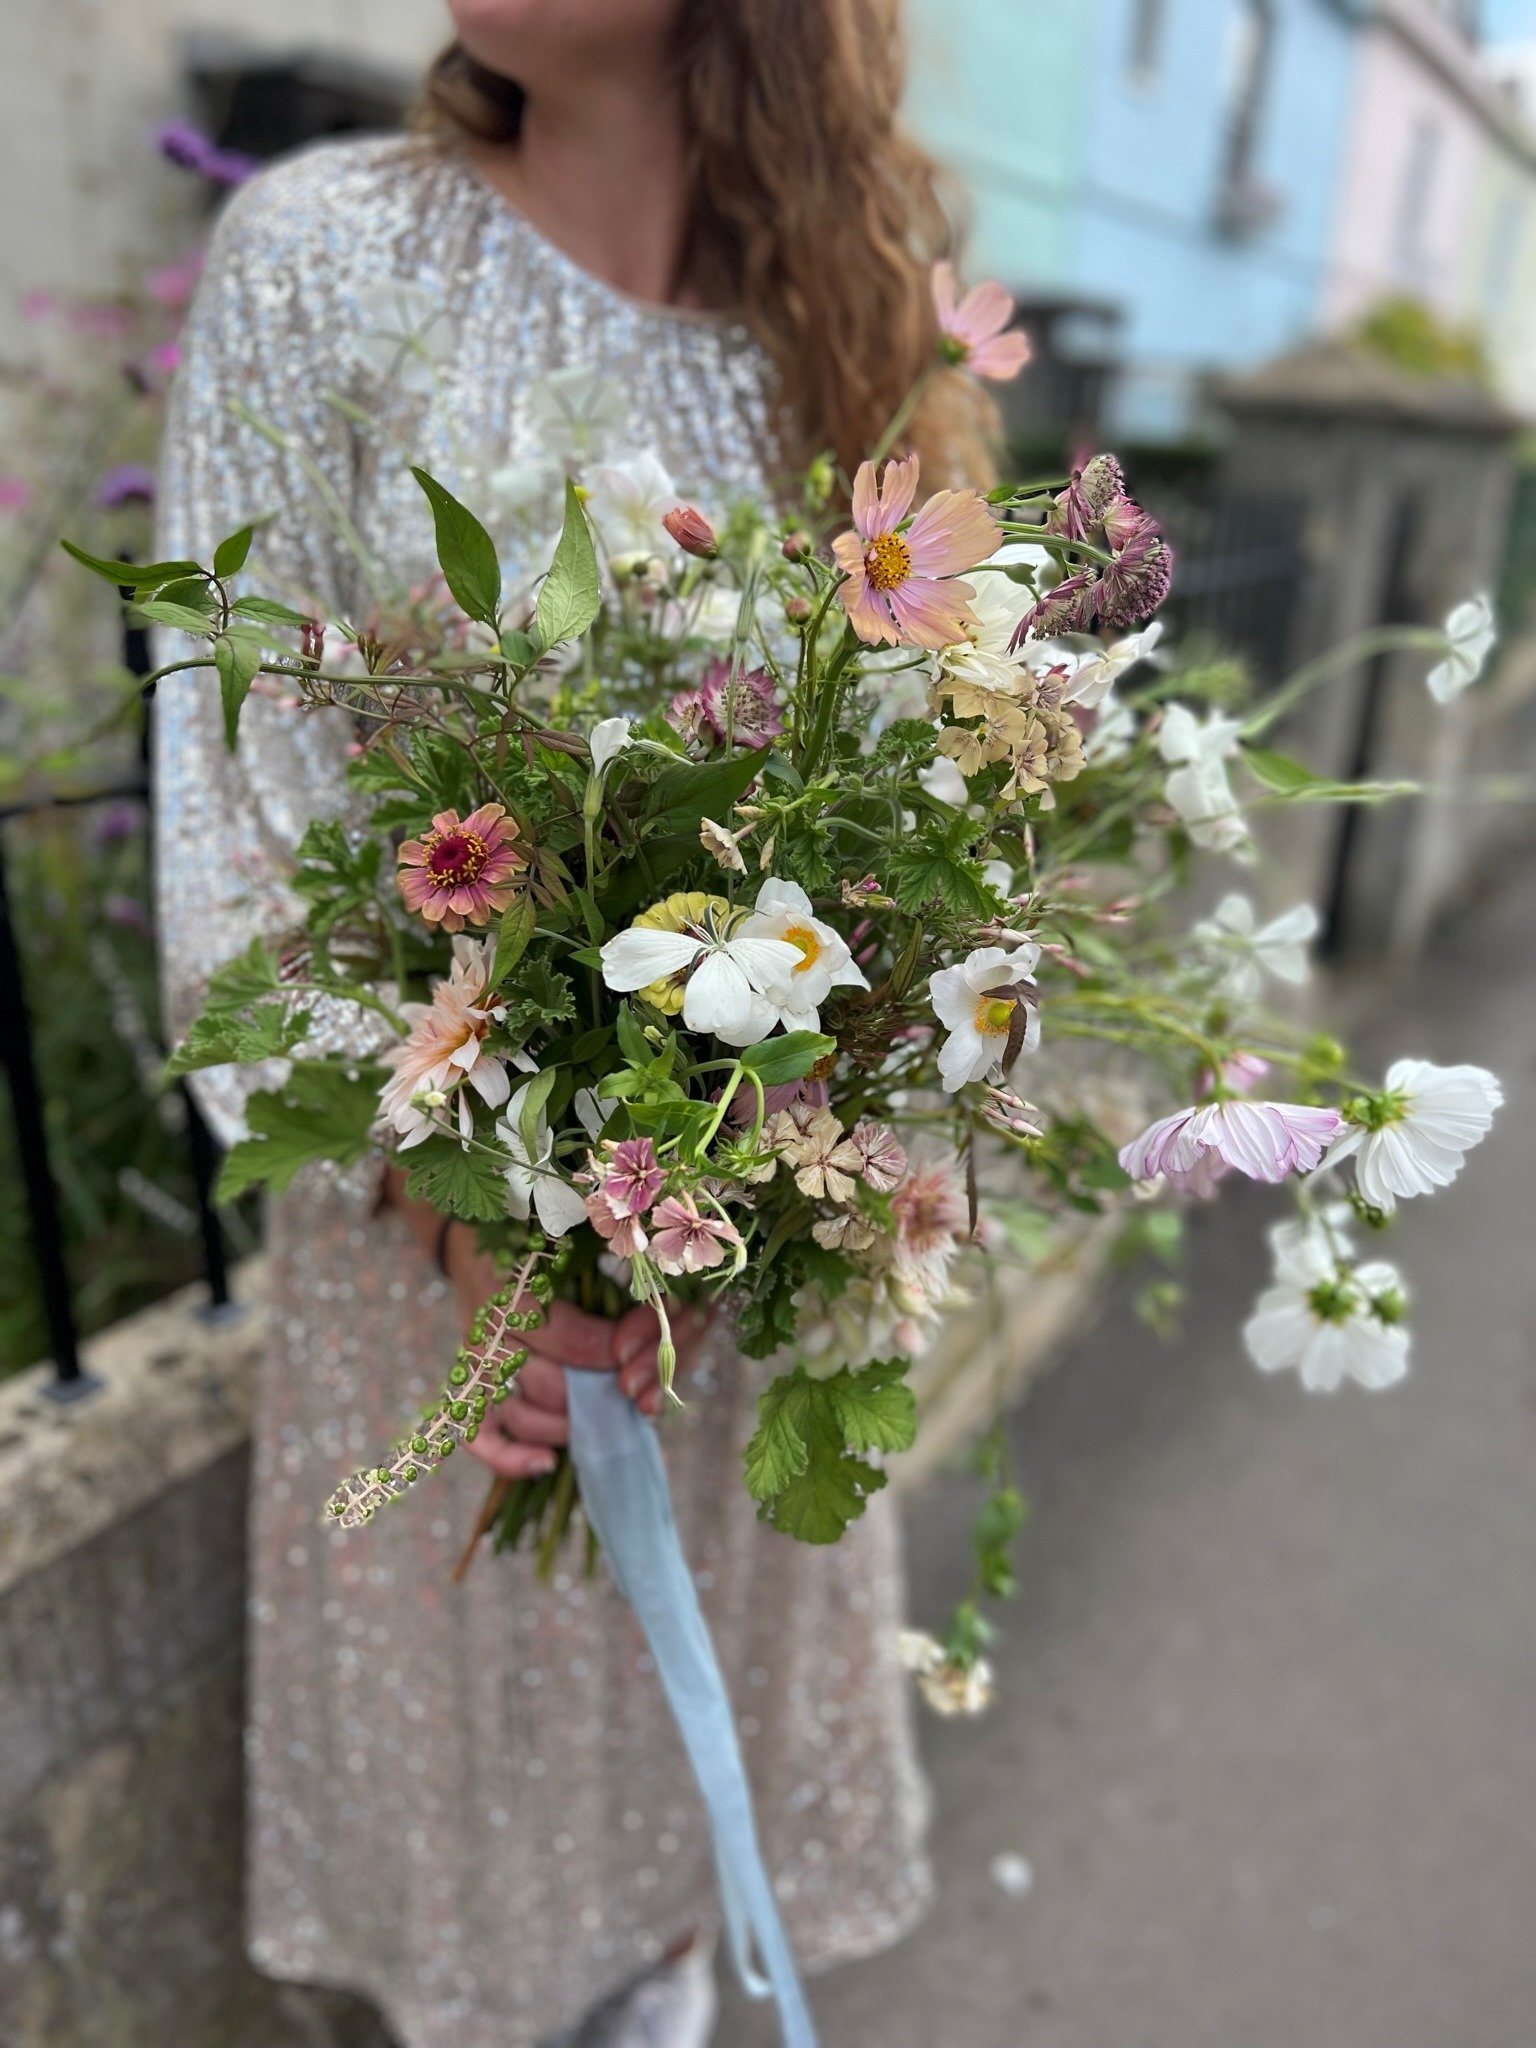 Bridal bouquet made on the DIY wedding flowers course 